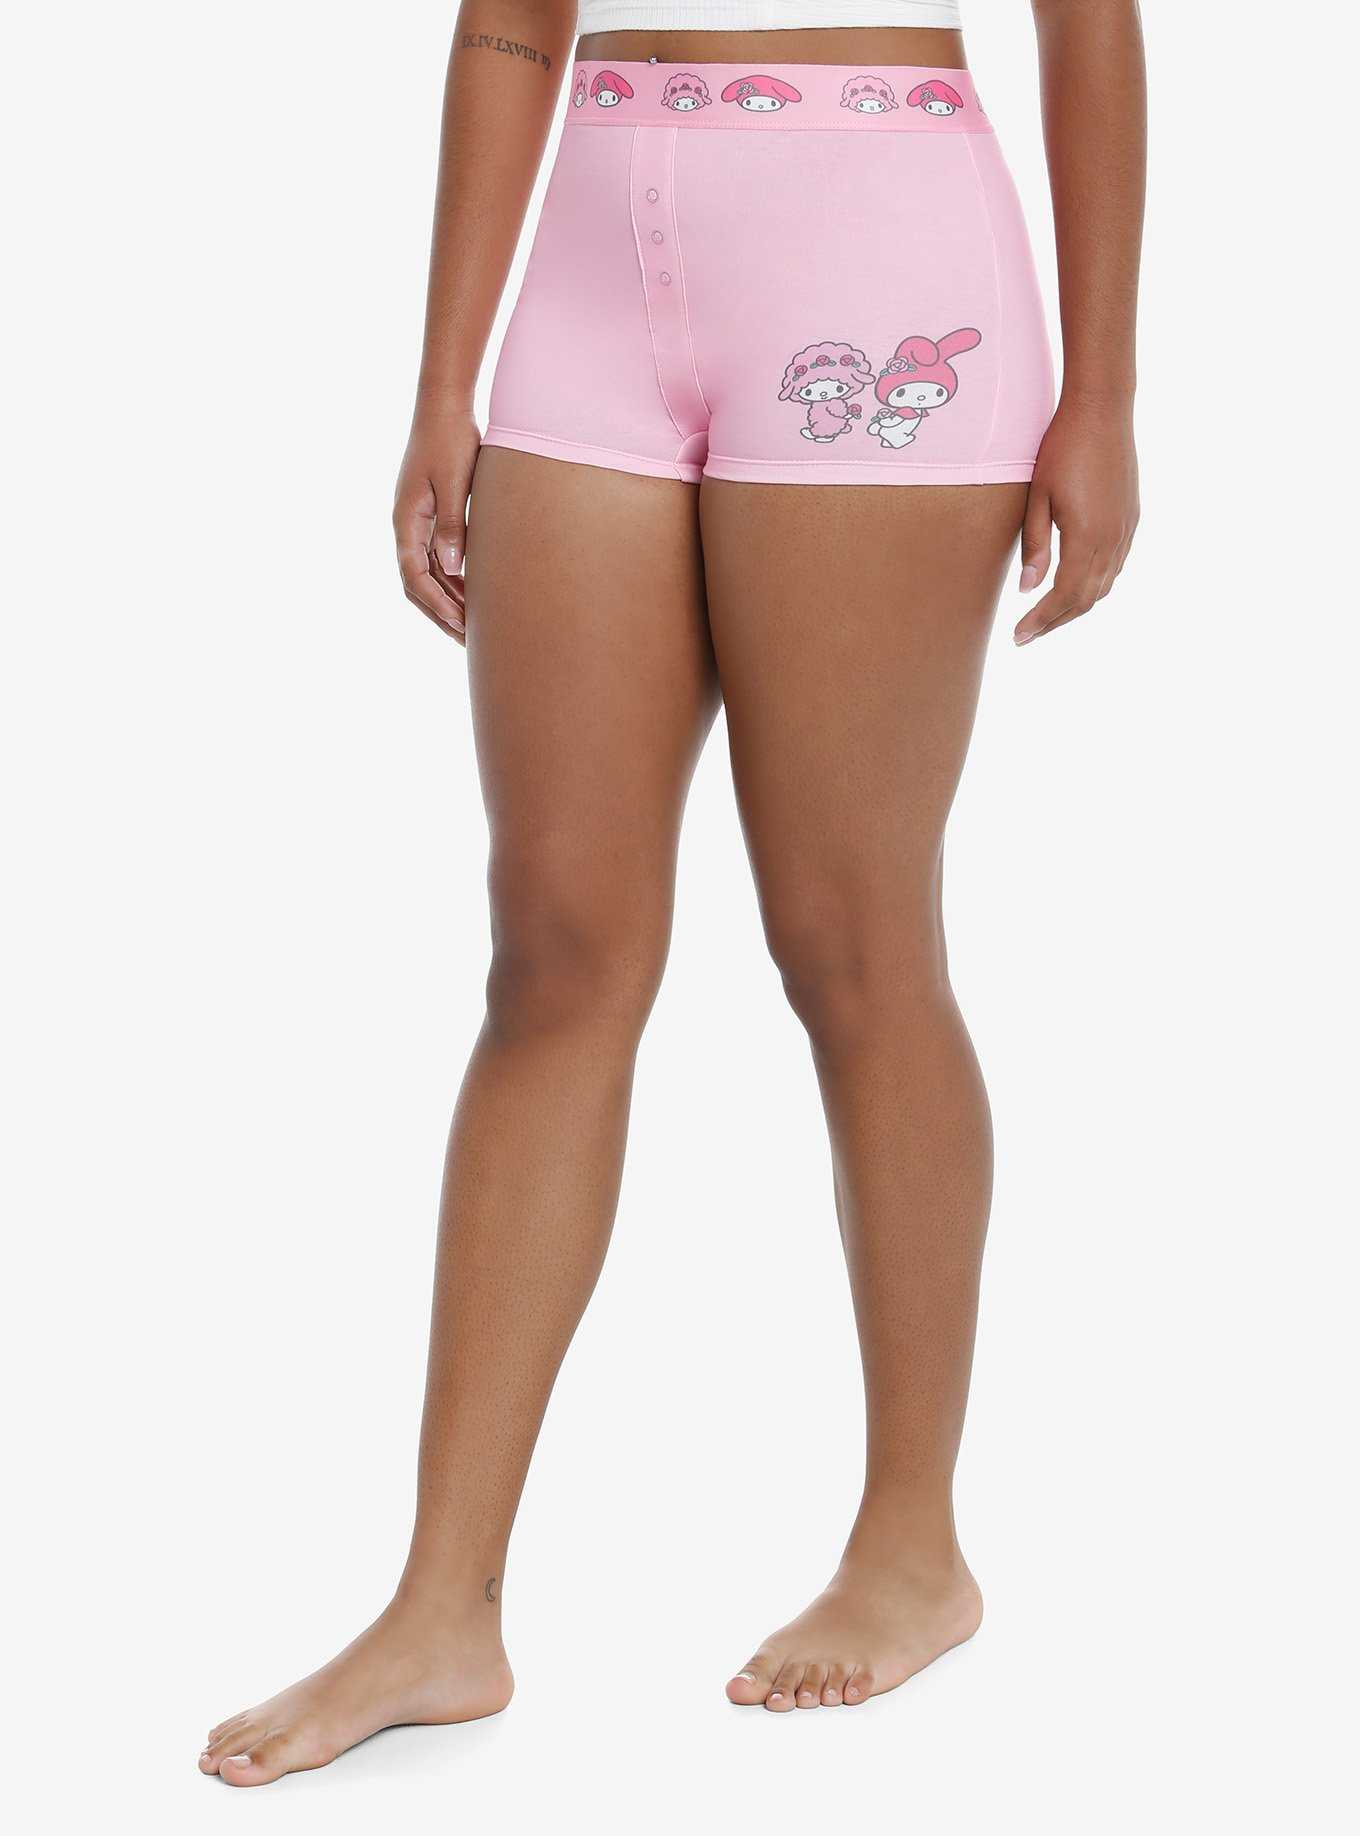 Sanrio Characters Women's Underwear and Sleepwear Lucky Bag From $9.89